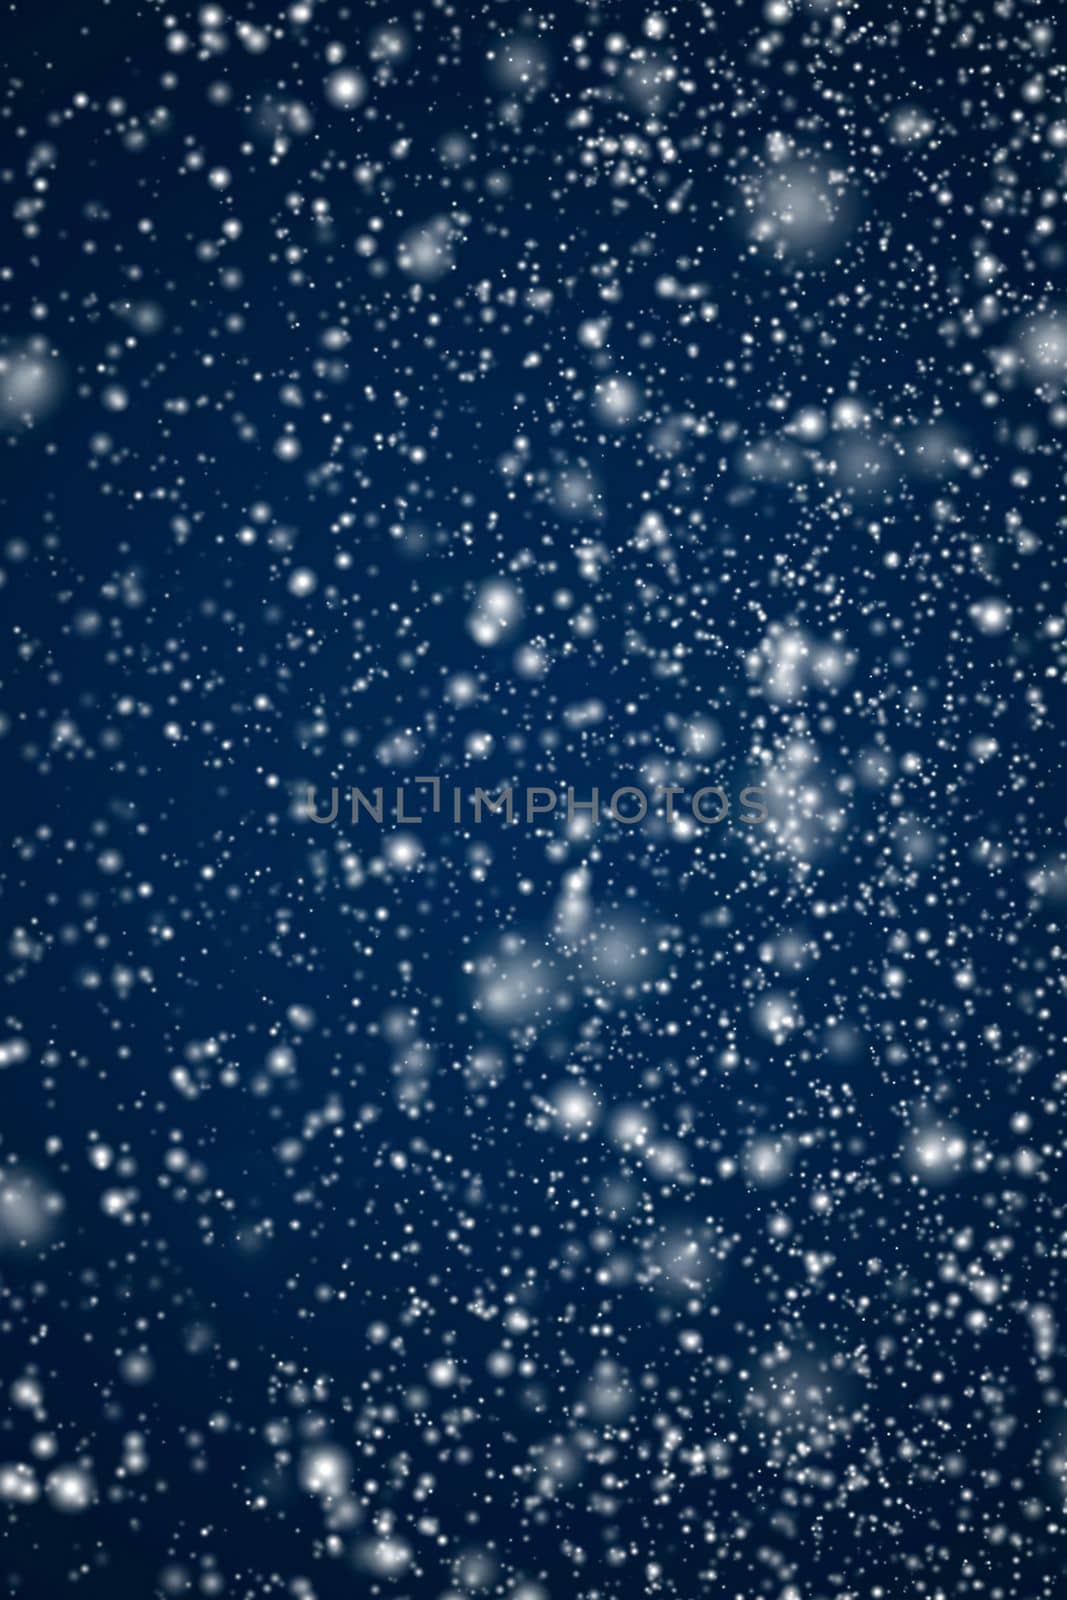 Winter holidays and wintertime background, white snow falling on dark blue backdrop, snowflakes bokeh and snowfall particles as abstract snowing scene for Christmas and snowy holiday design by Anneleven